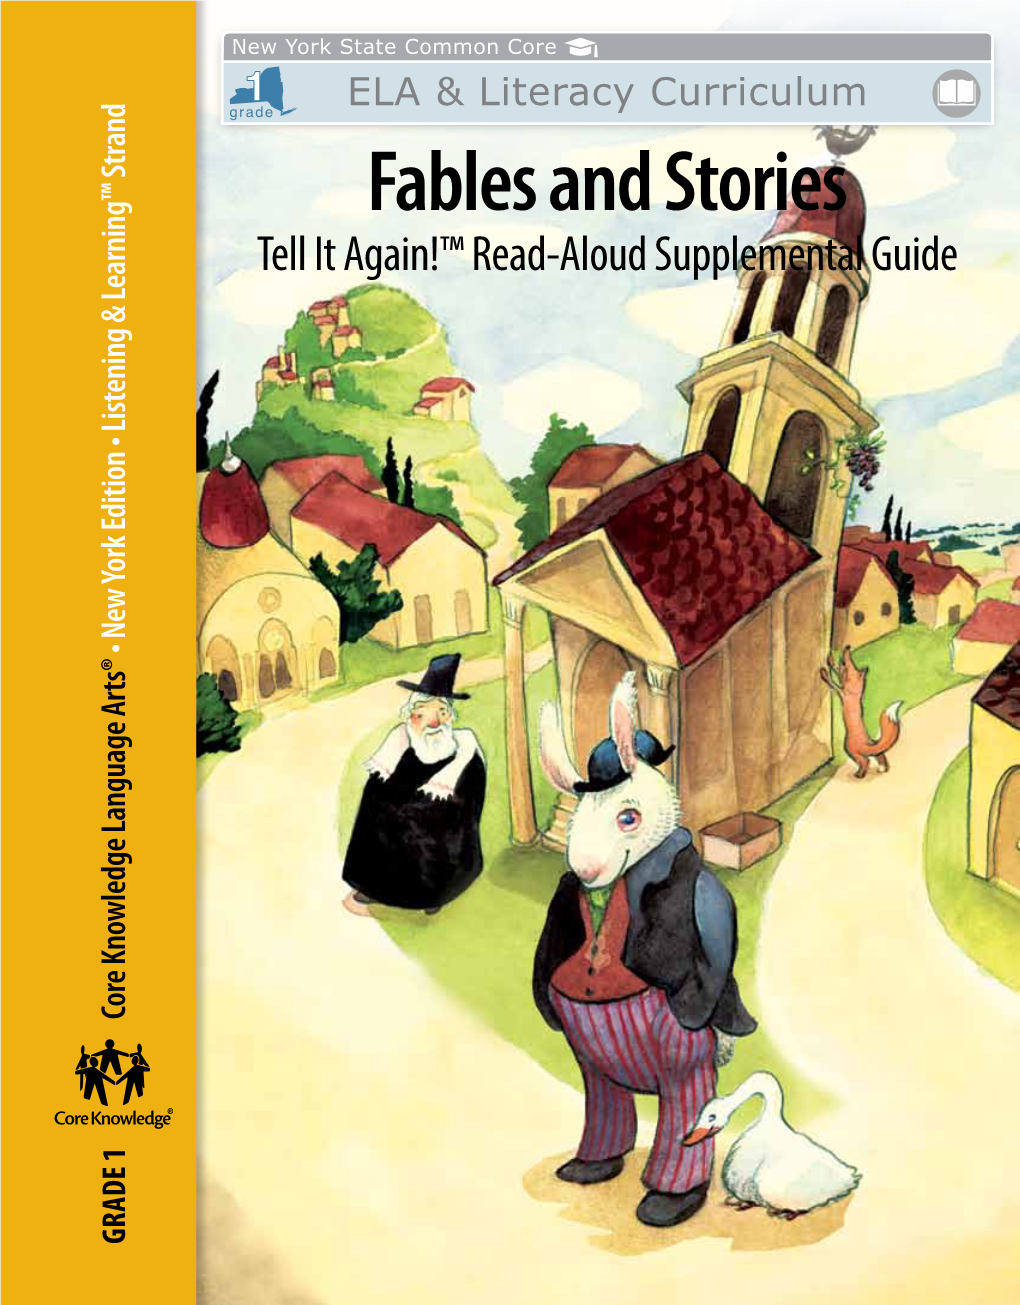 Fables and Stories